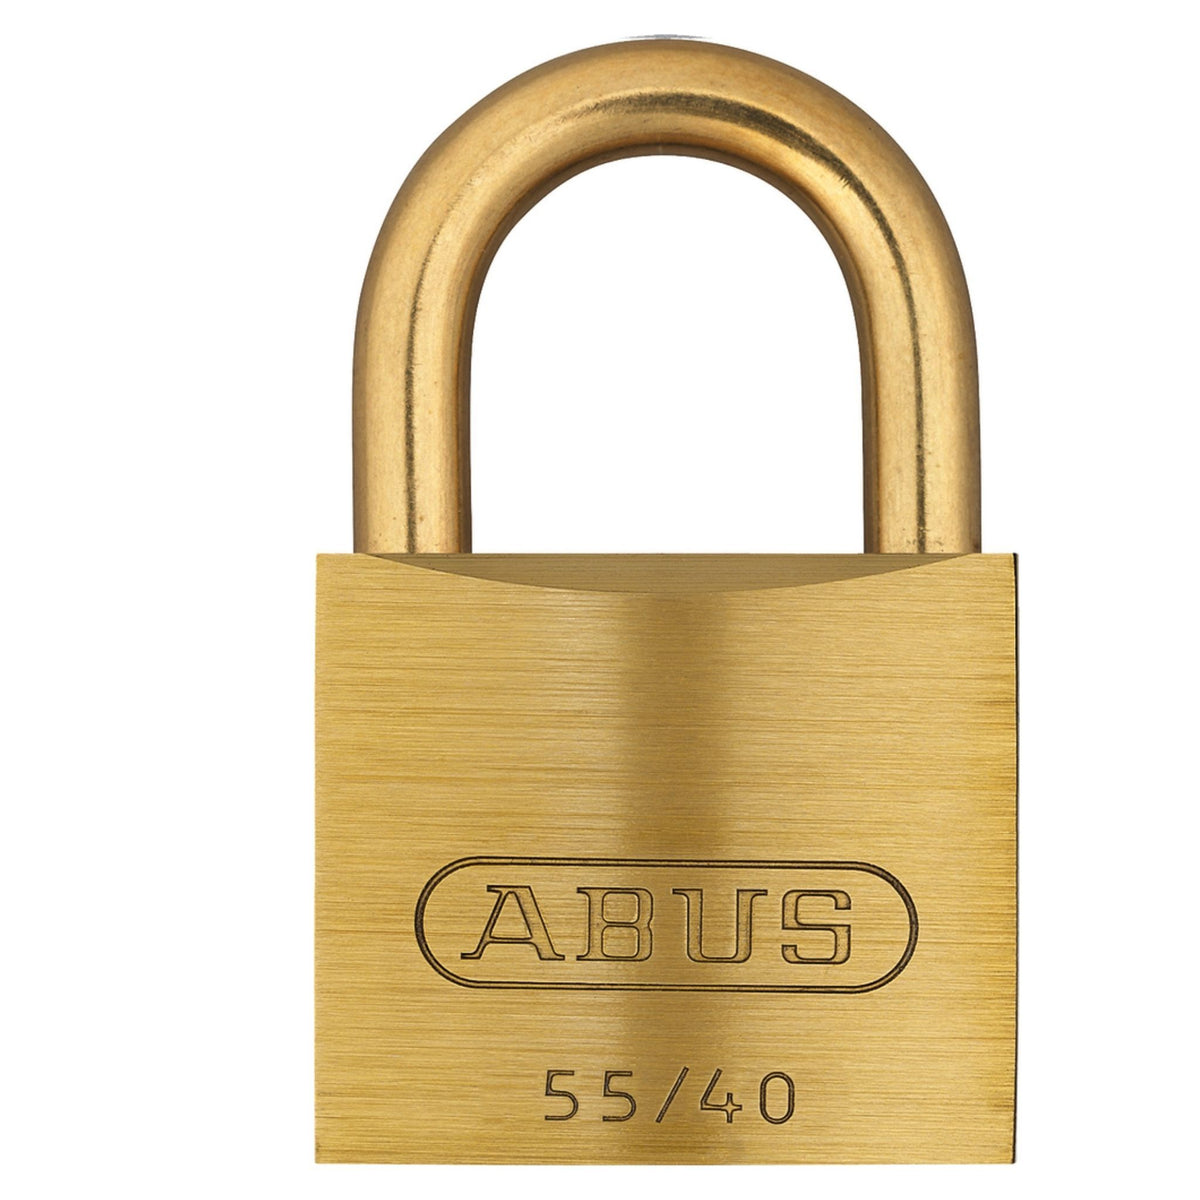 Abus 55MB/40 KAx10 Brass Padlock Keyed Alike in Set of 10 Locks With Brass Shackle - The Lock Source